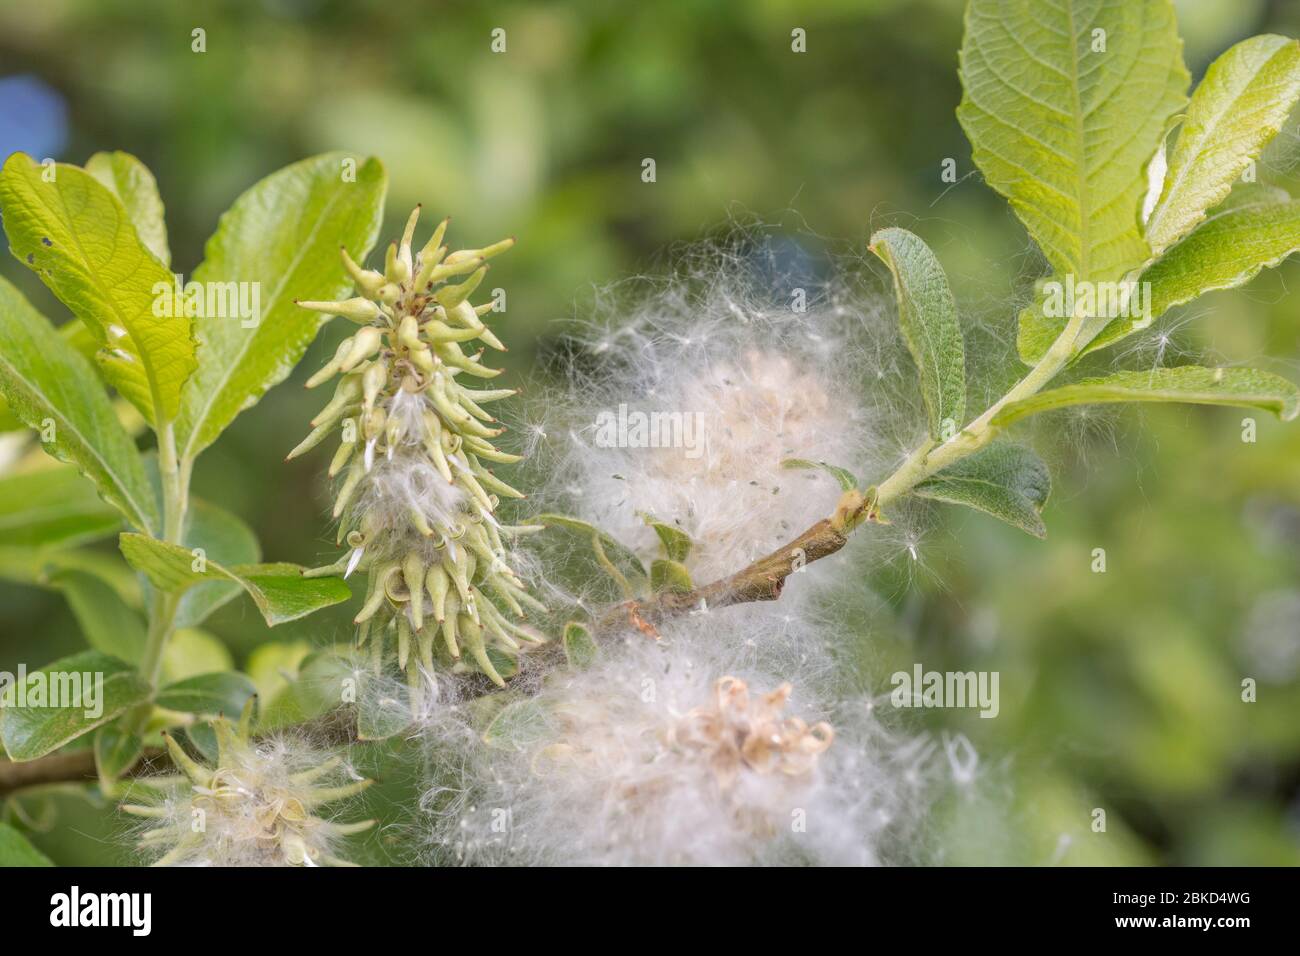 Fluffy female flower catkins of Goat Willow / Salix caprea which favours damp ground habitats. Medicinal Willow species once used in herbal remedies. Stock Photo